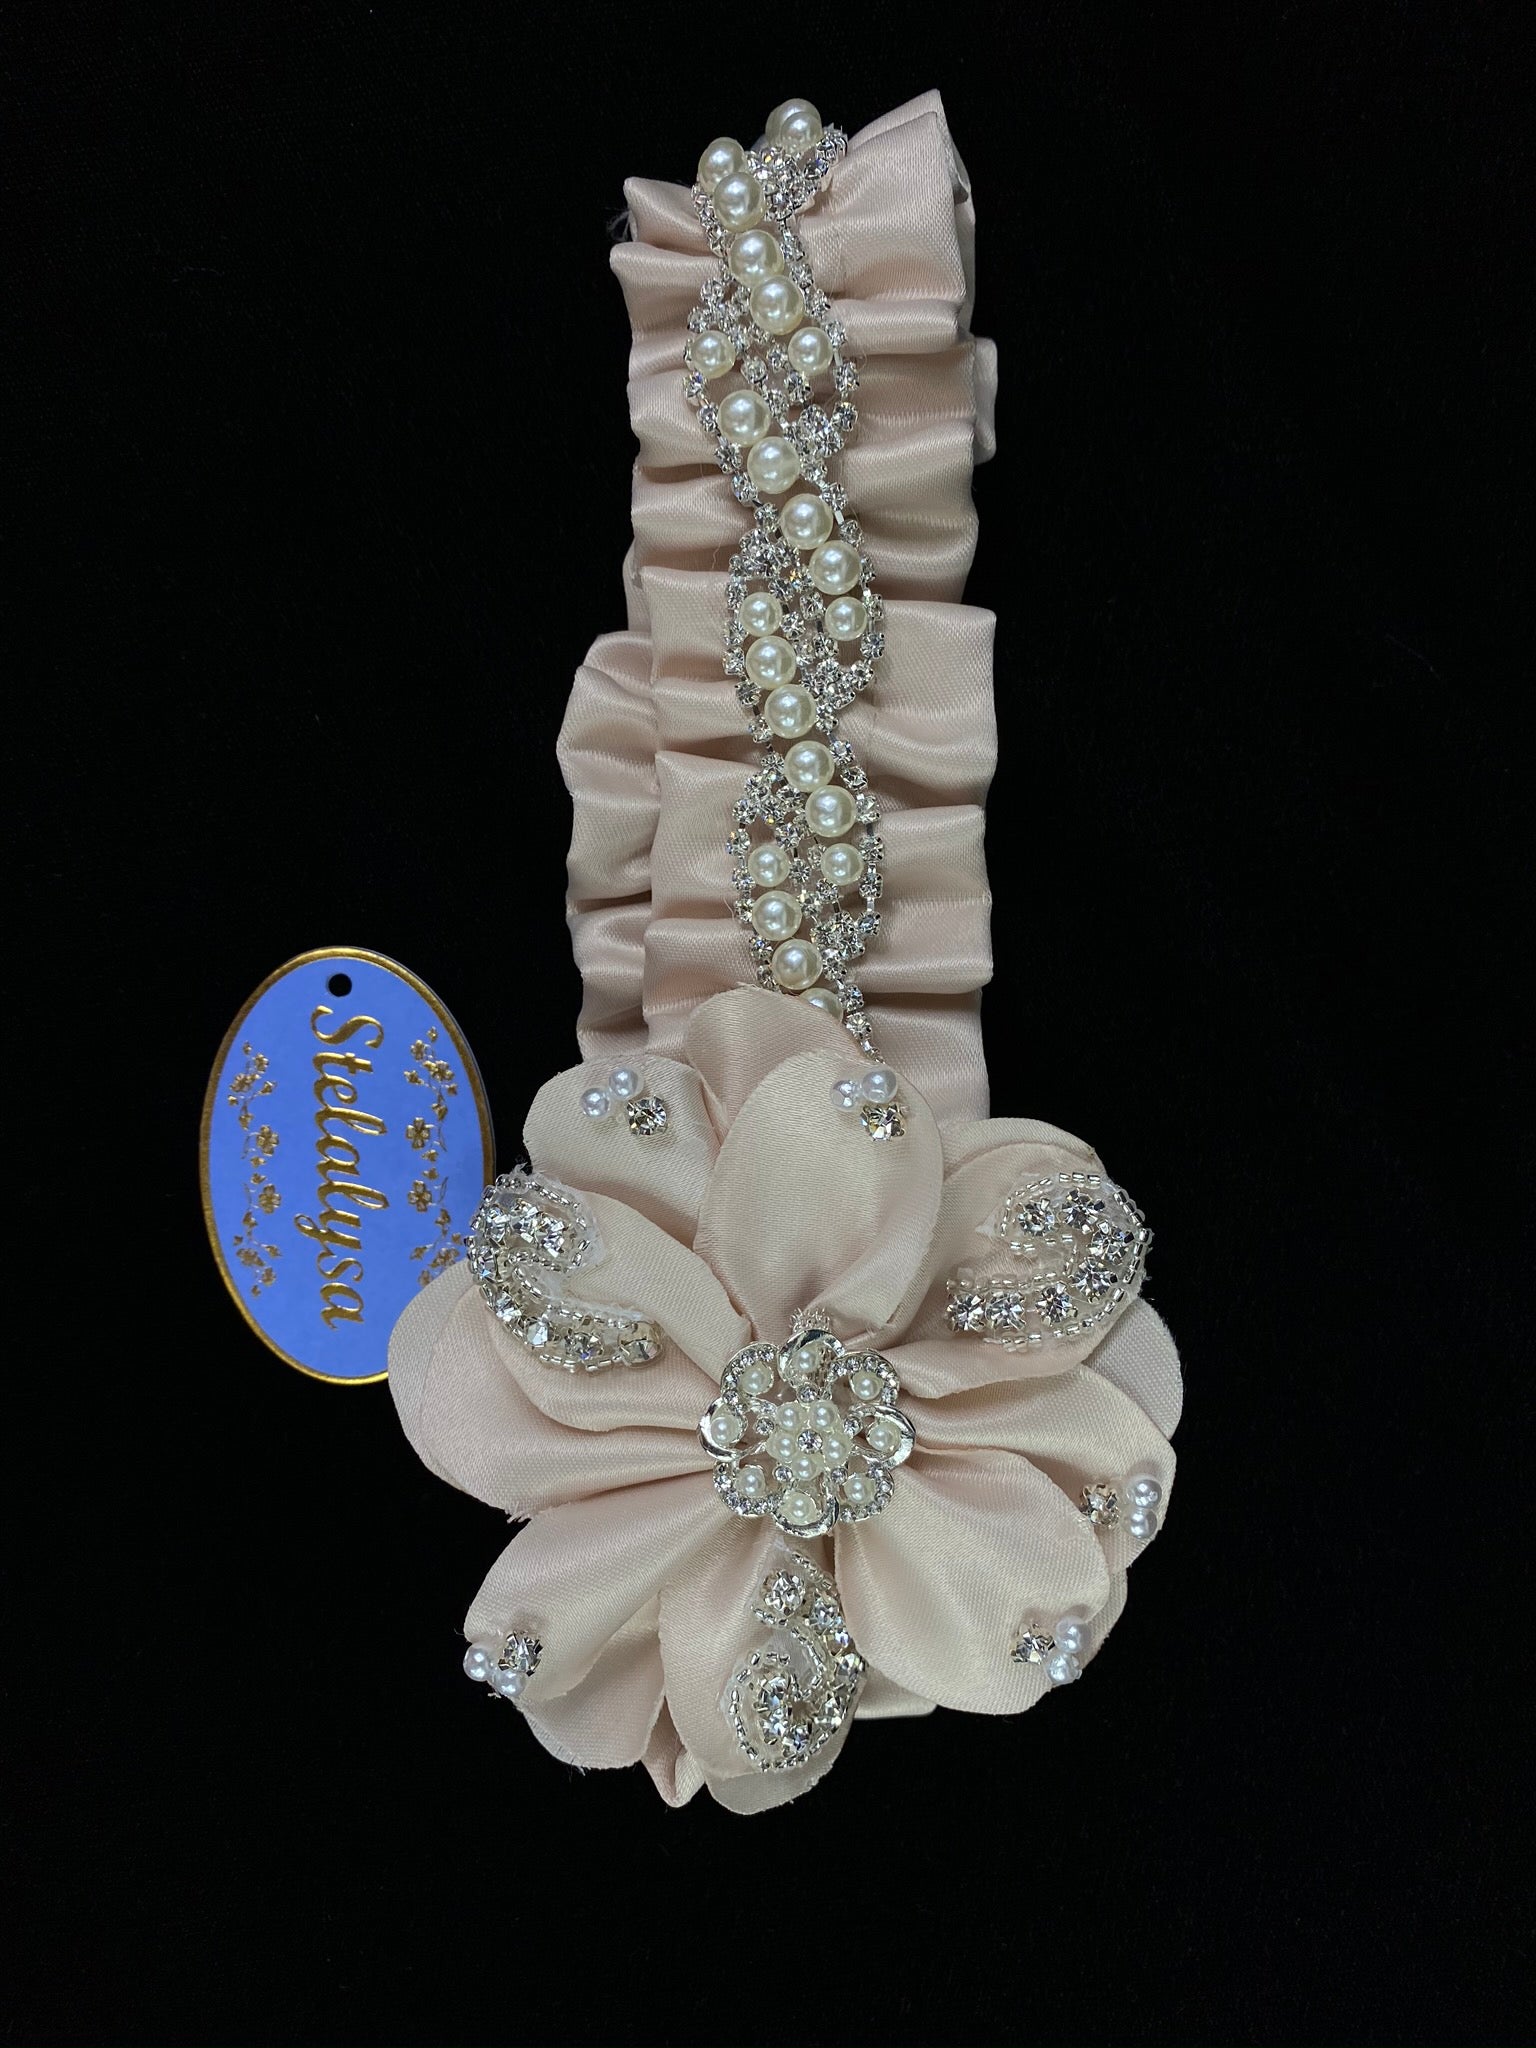 Baptism Headwrap  This is an elegant handmade and one-of-a-kind Champagne satin headwrap with satin flowers and rhinestones and pearls.  Headwrap is elastic wrapped on soft satin material.   Your baby will look like the little princess she is with this headwrap on her special day!  